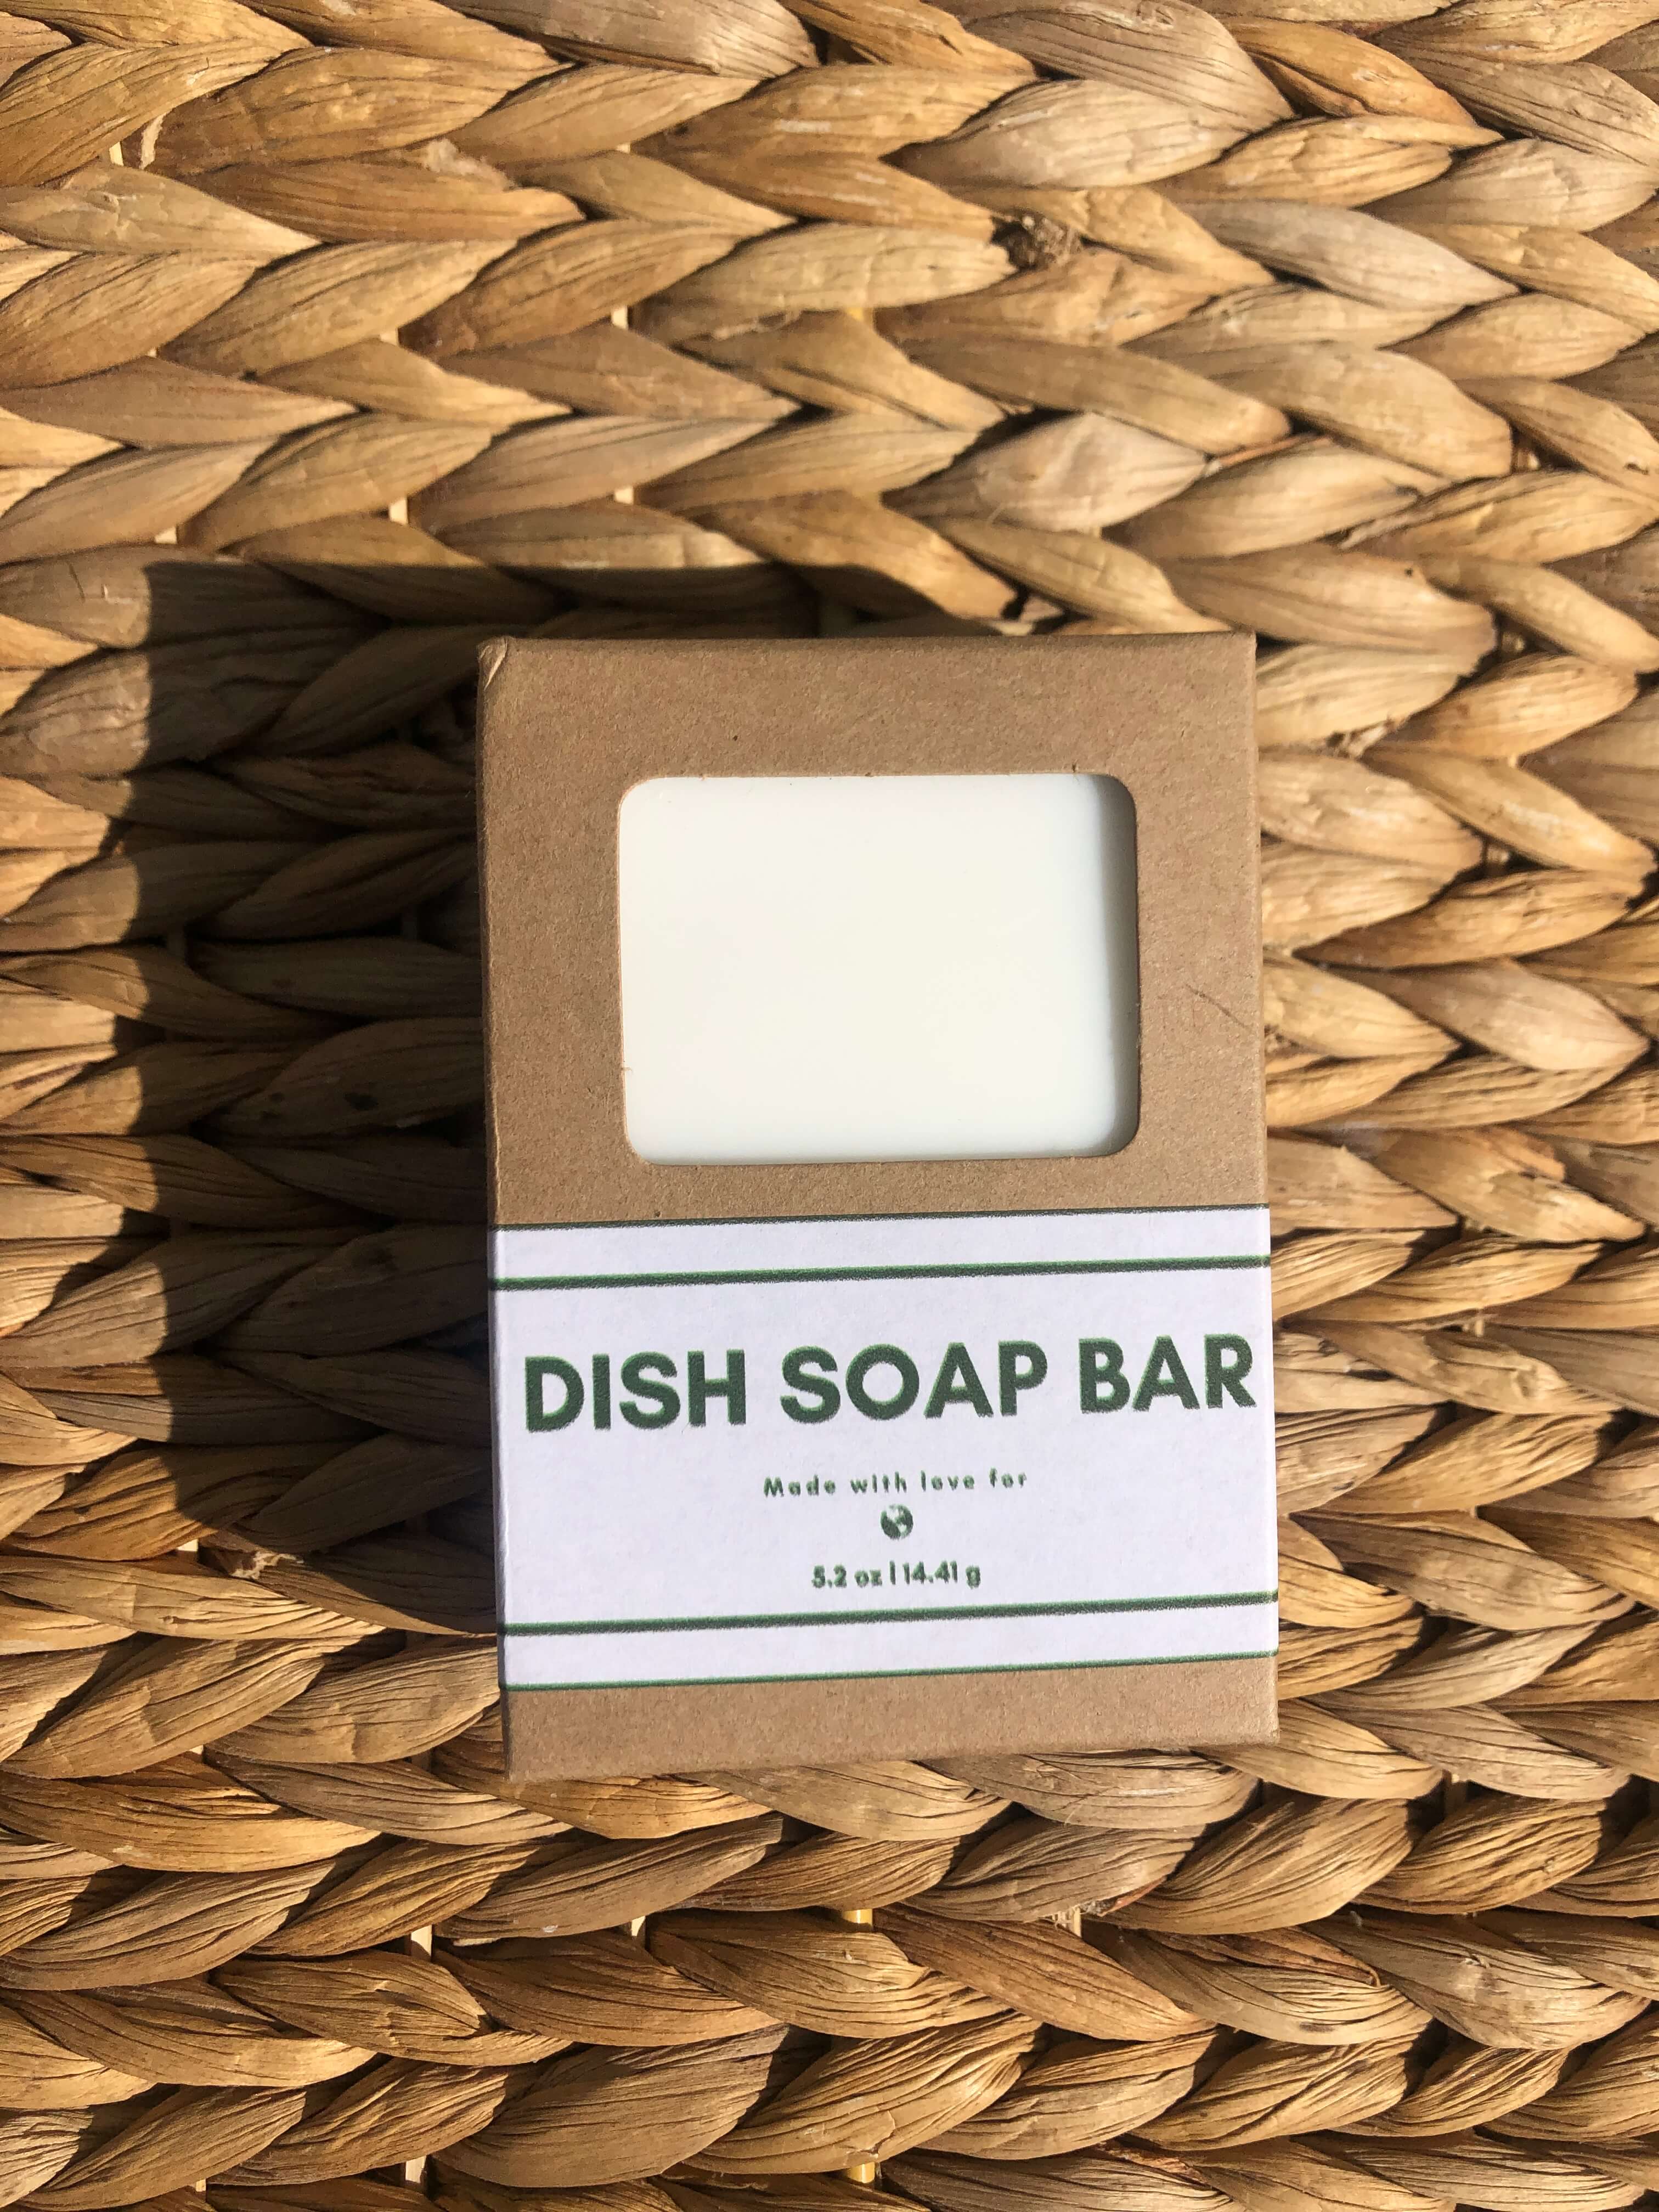 Dish soap in a compostable box that I use for my non toxic cleaning routine.